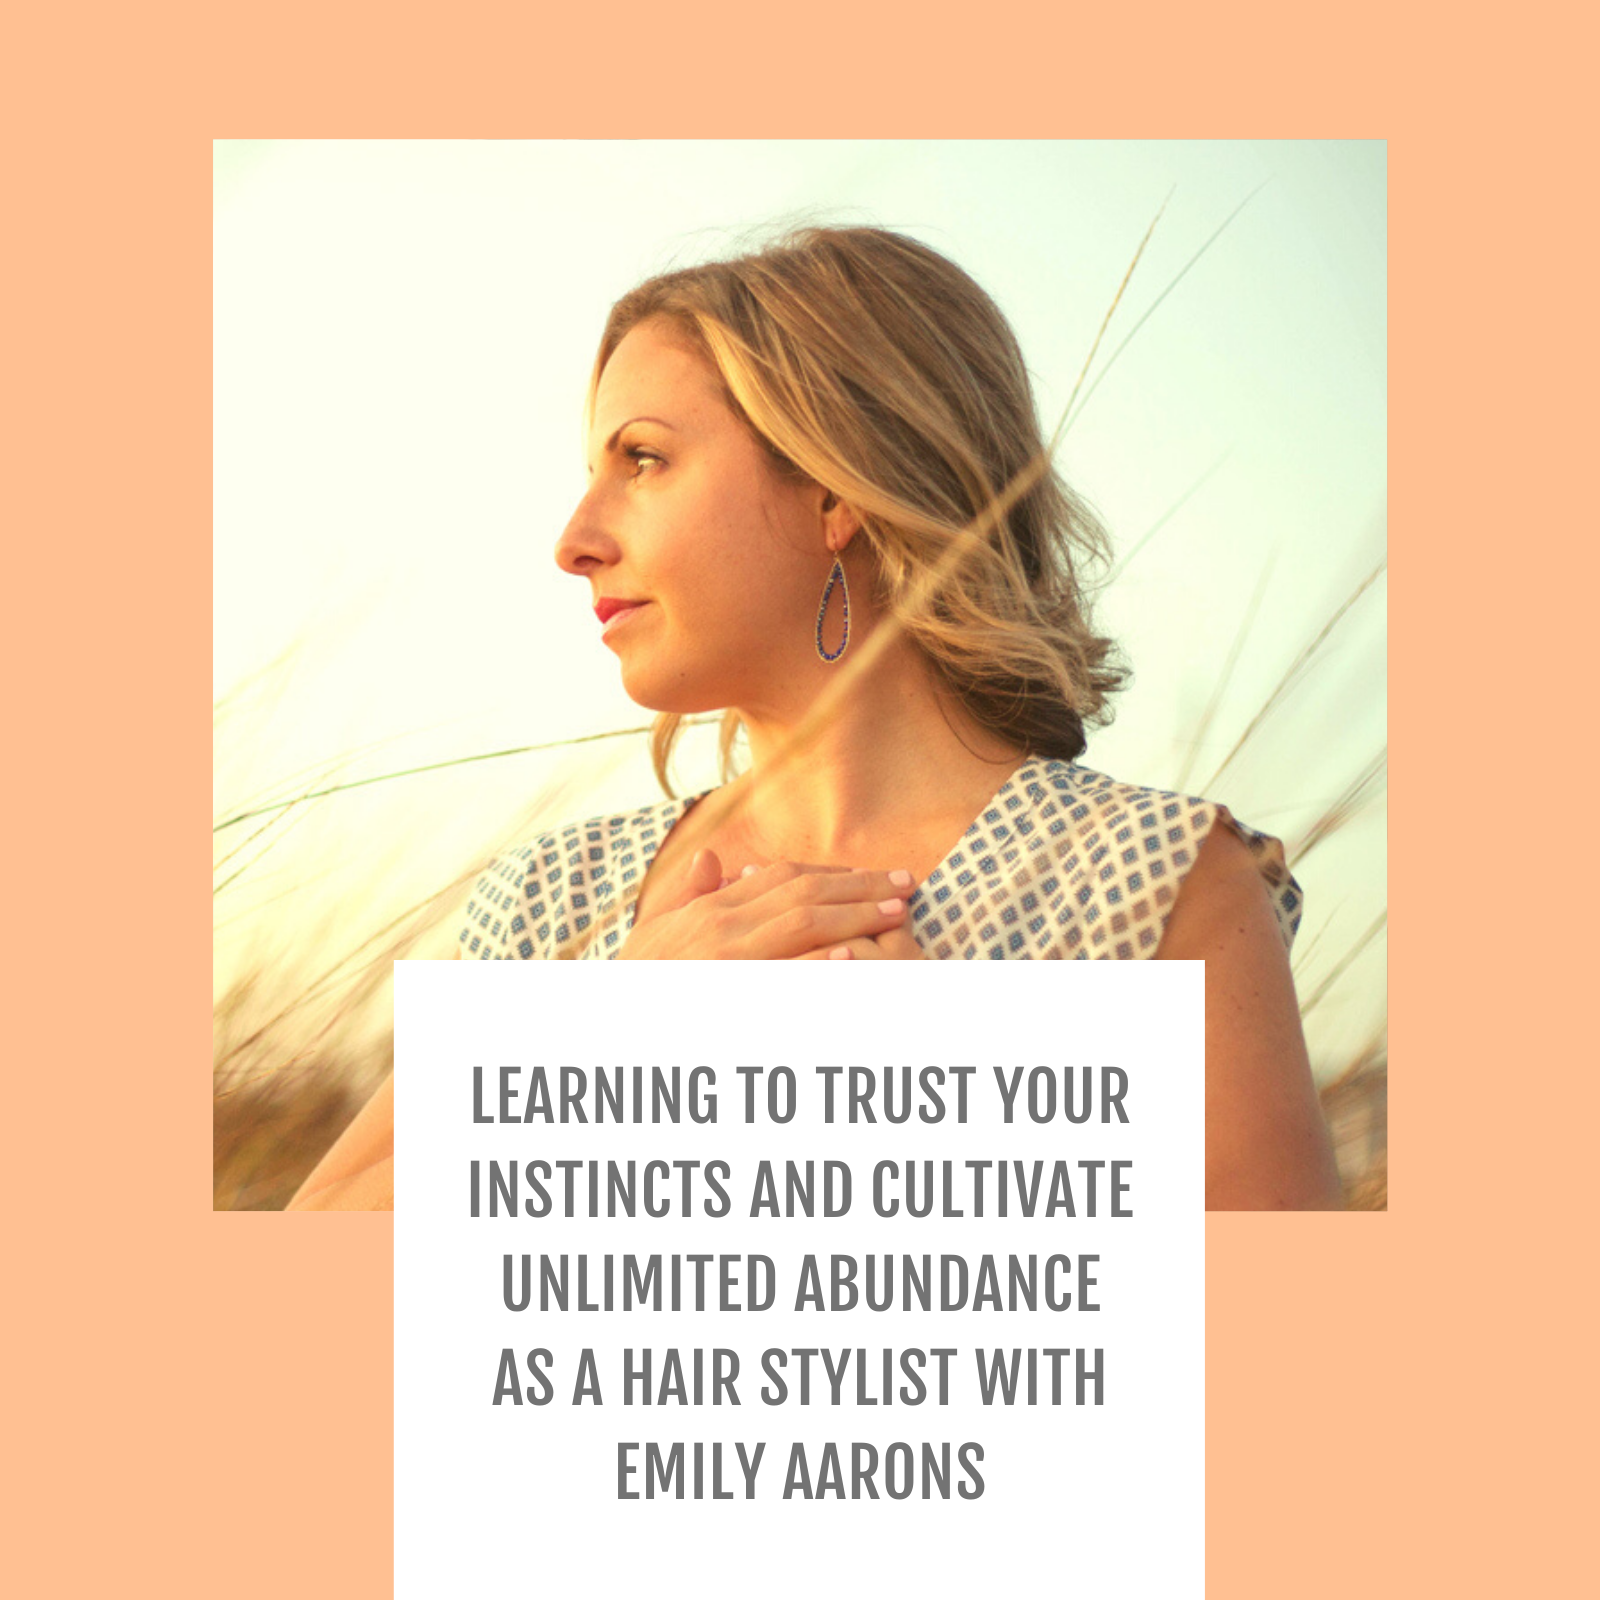 Episode #032: Learning to trust your instincts and cultivate unlimited abundance as a hair stylist with Emily Aarons